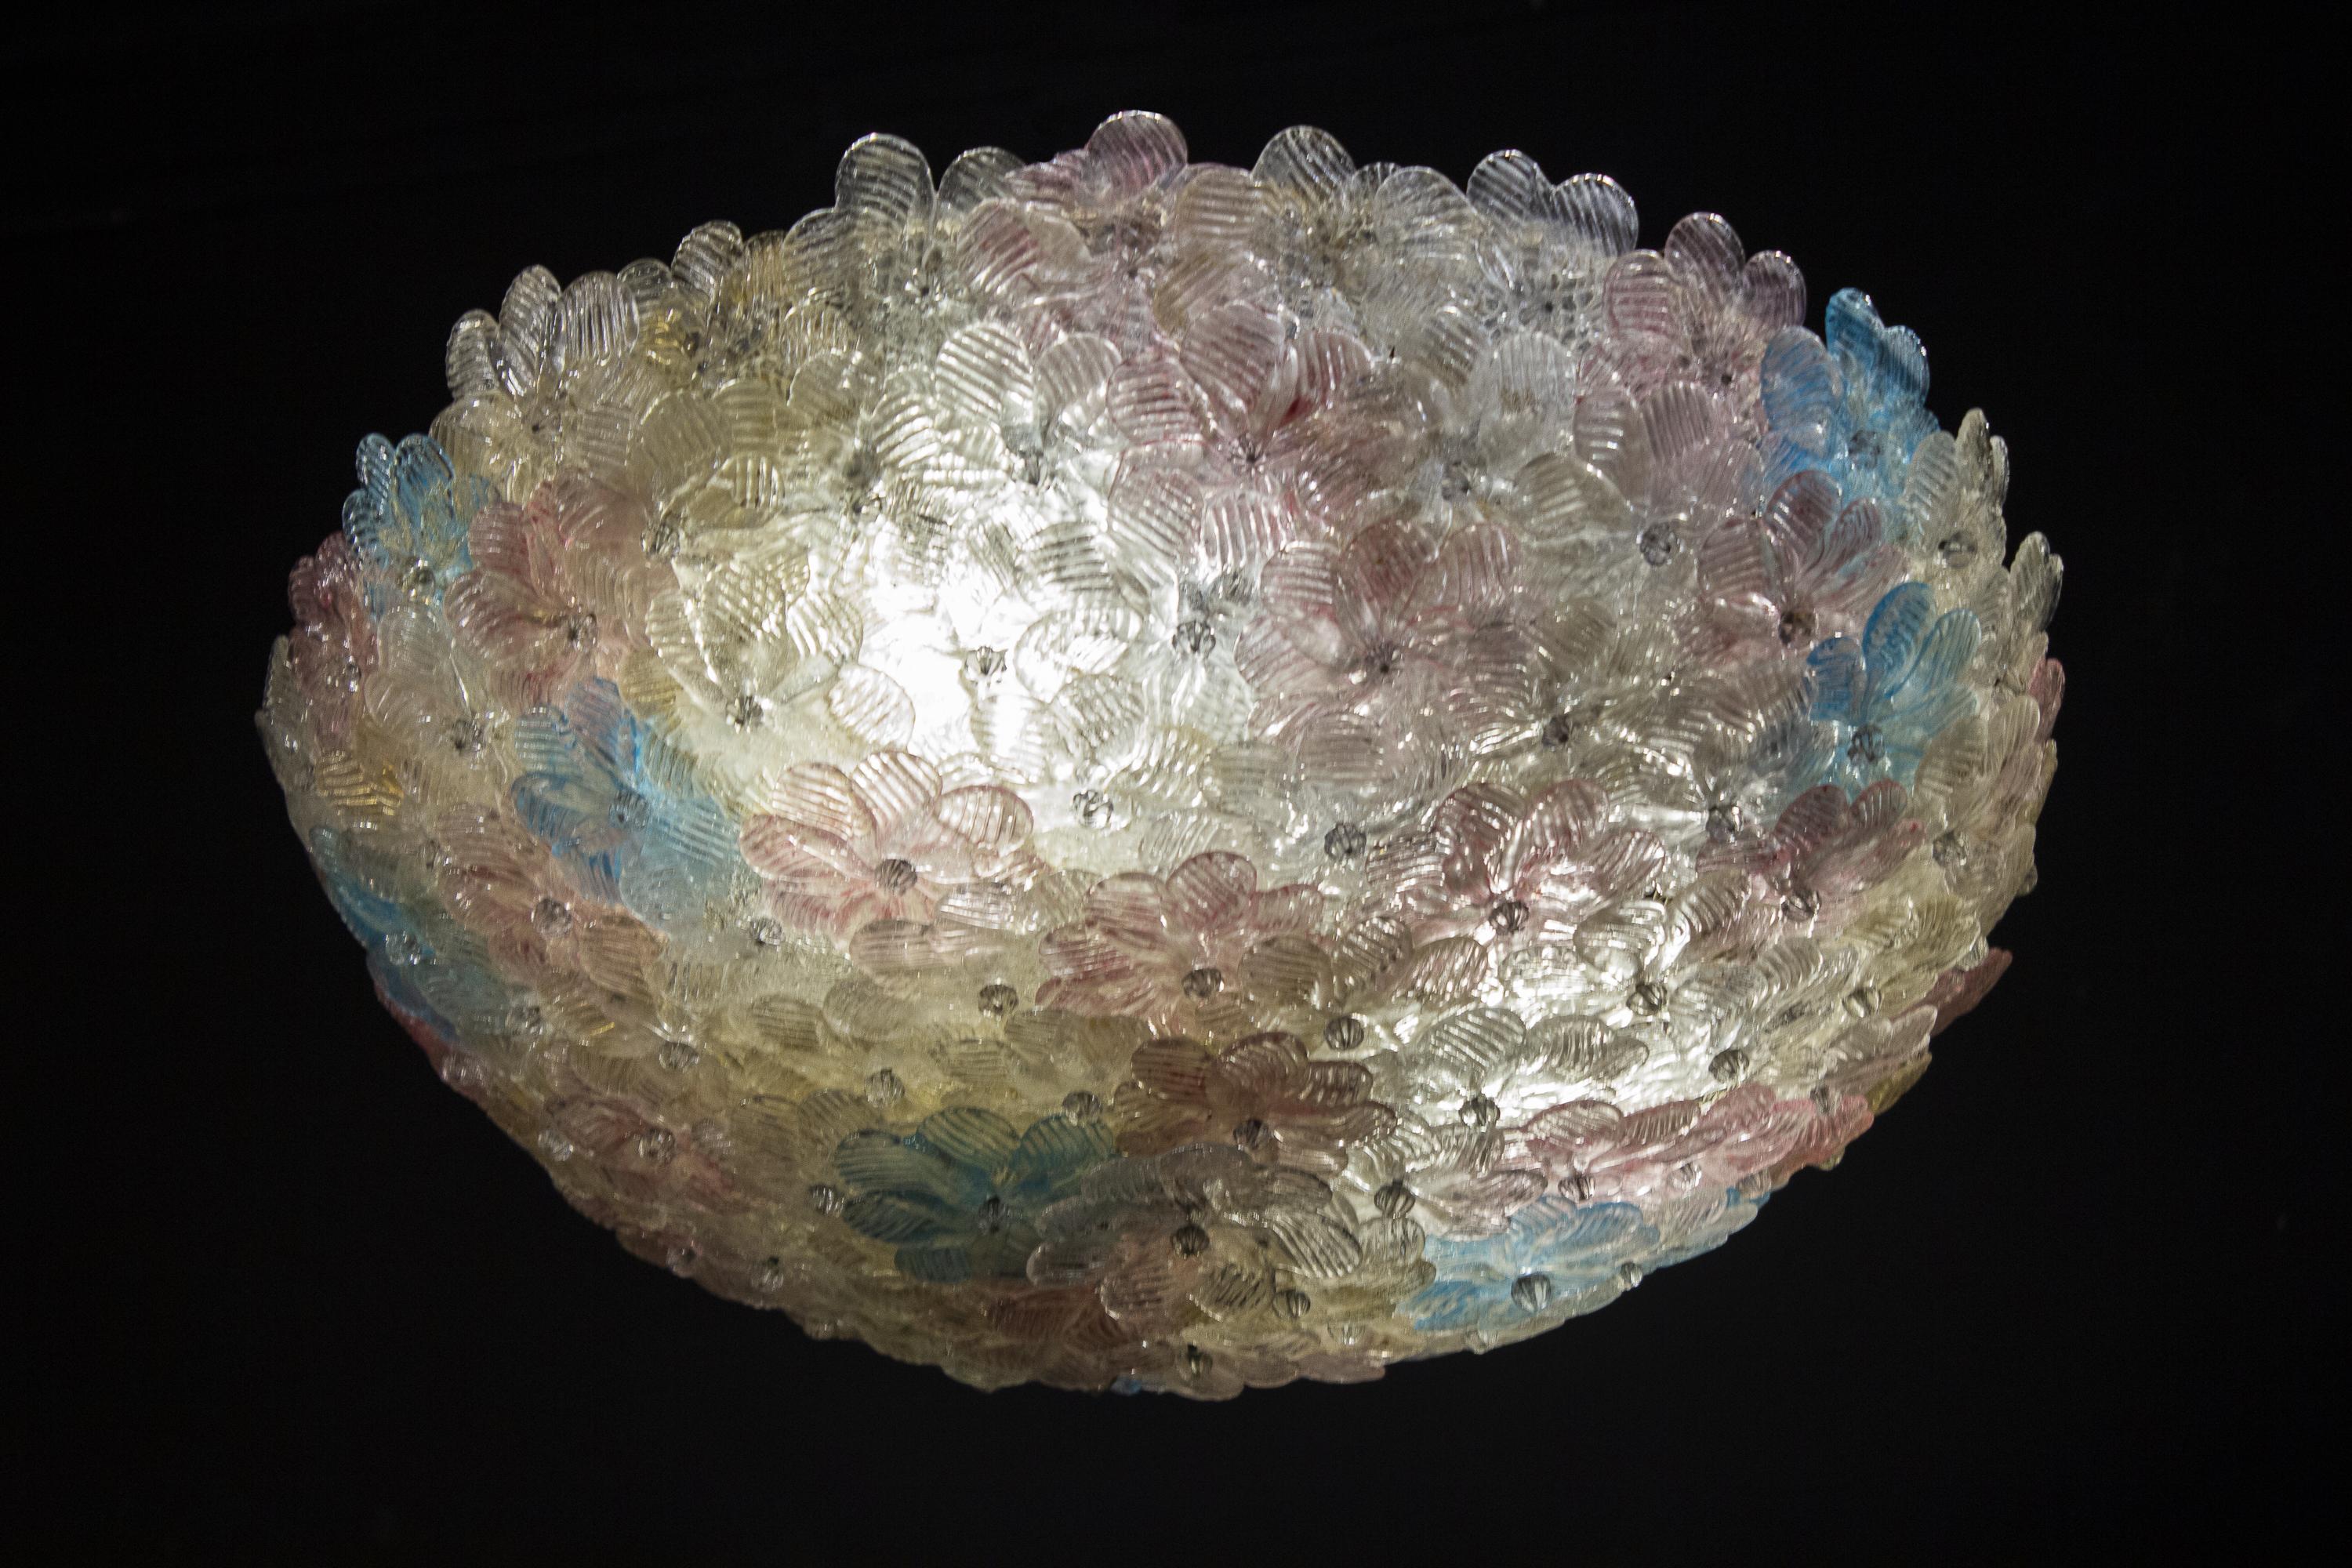 Pair of Amazing Venetian Ceiling Flowers Basket by Barovier & Toso, 1950s For Sale 5